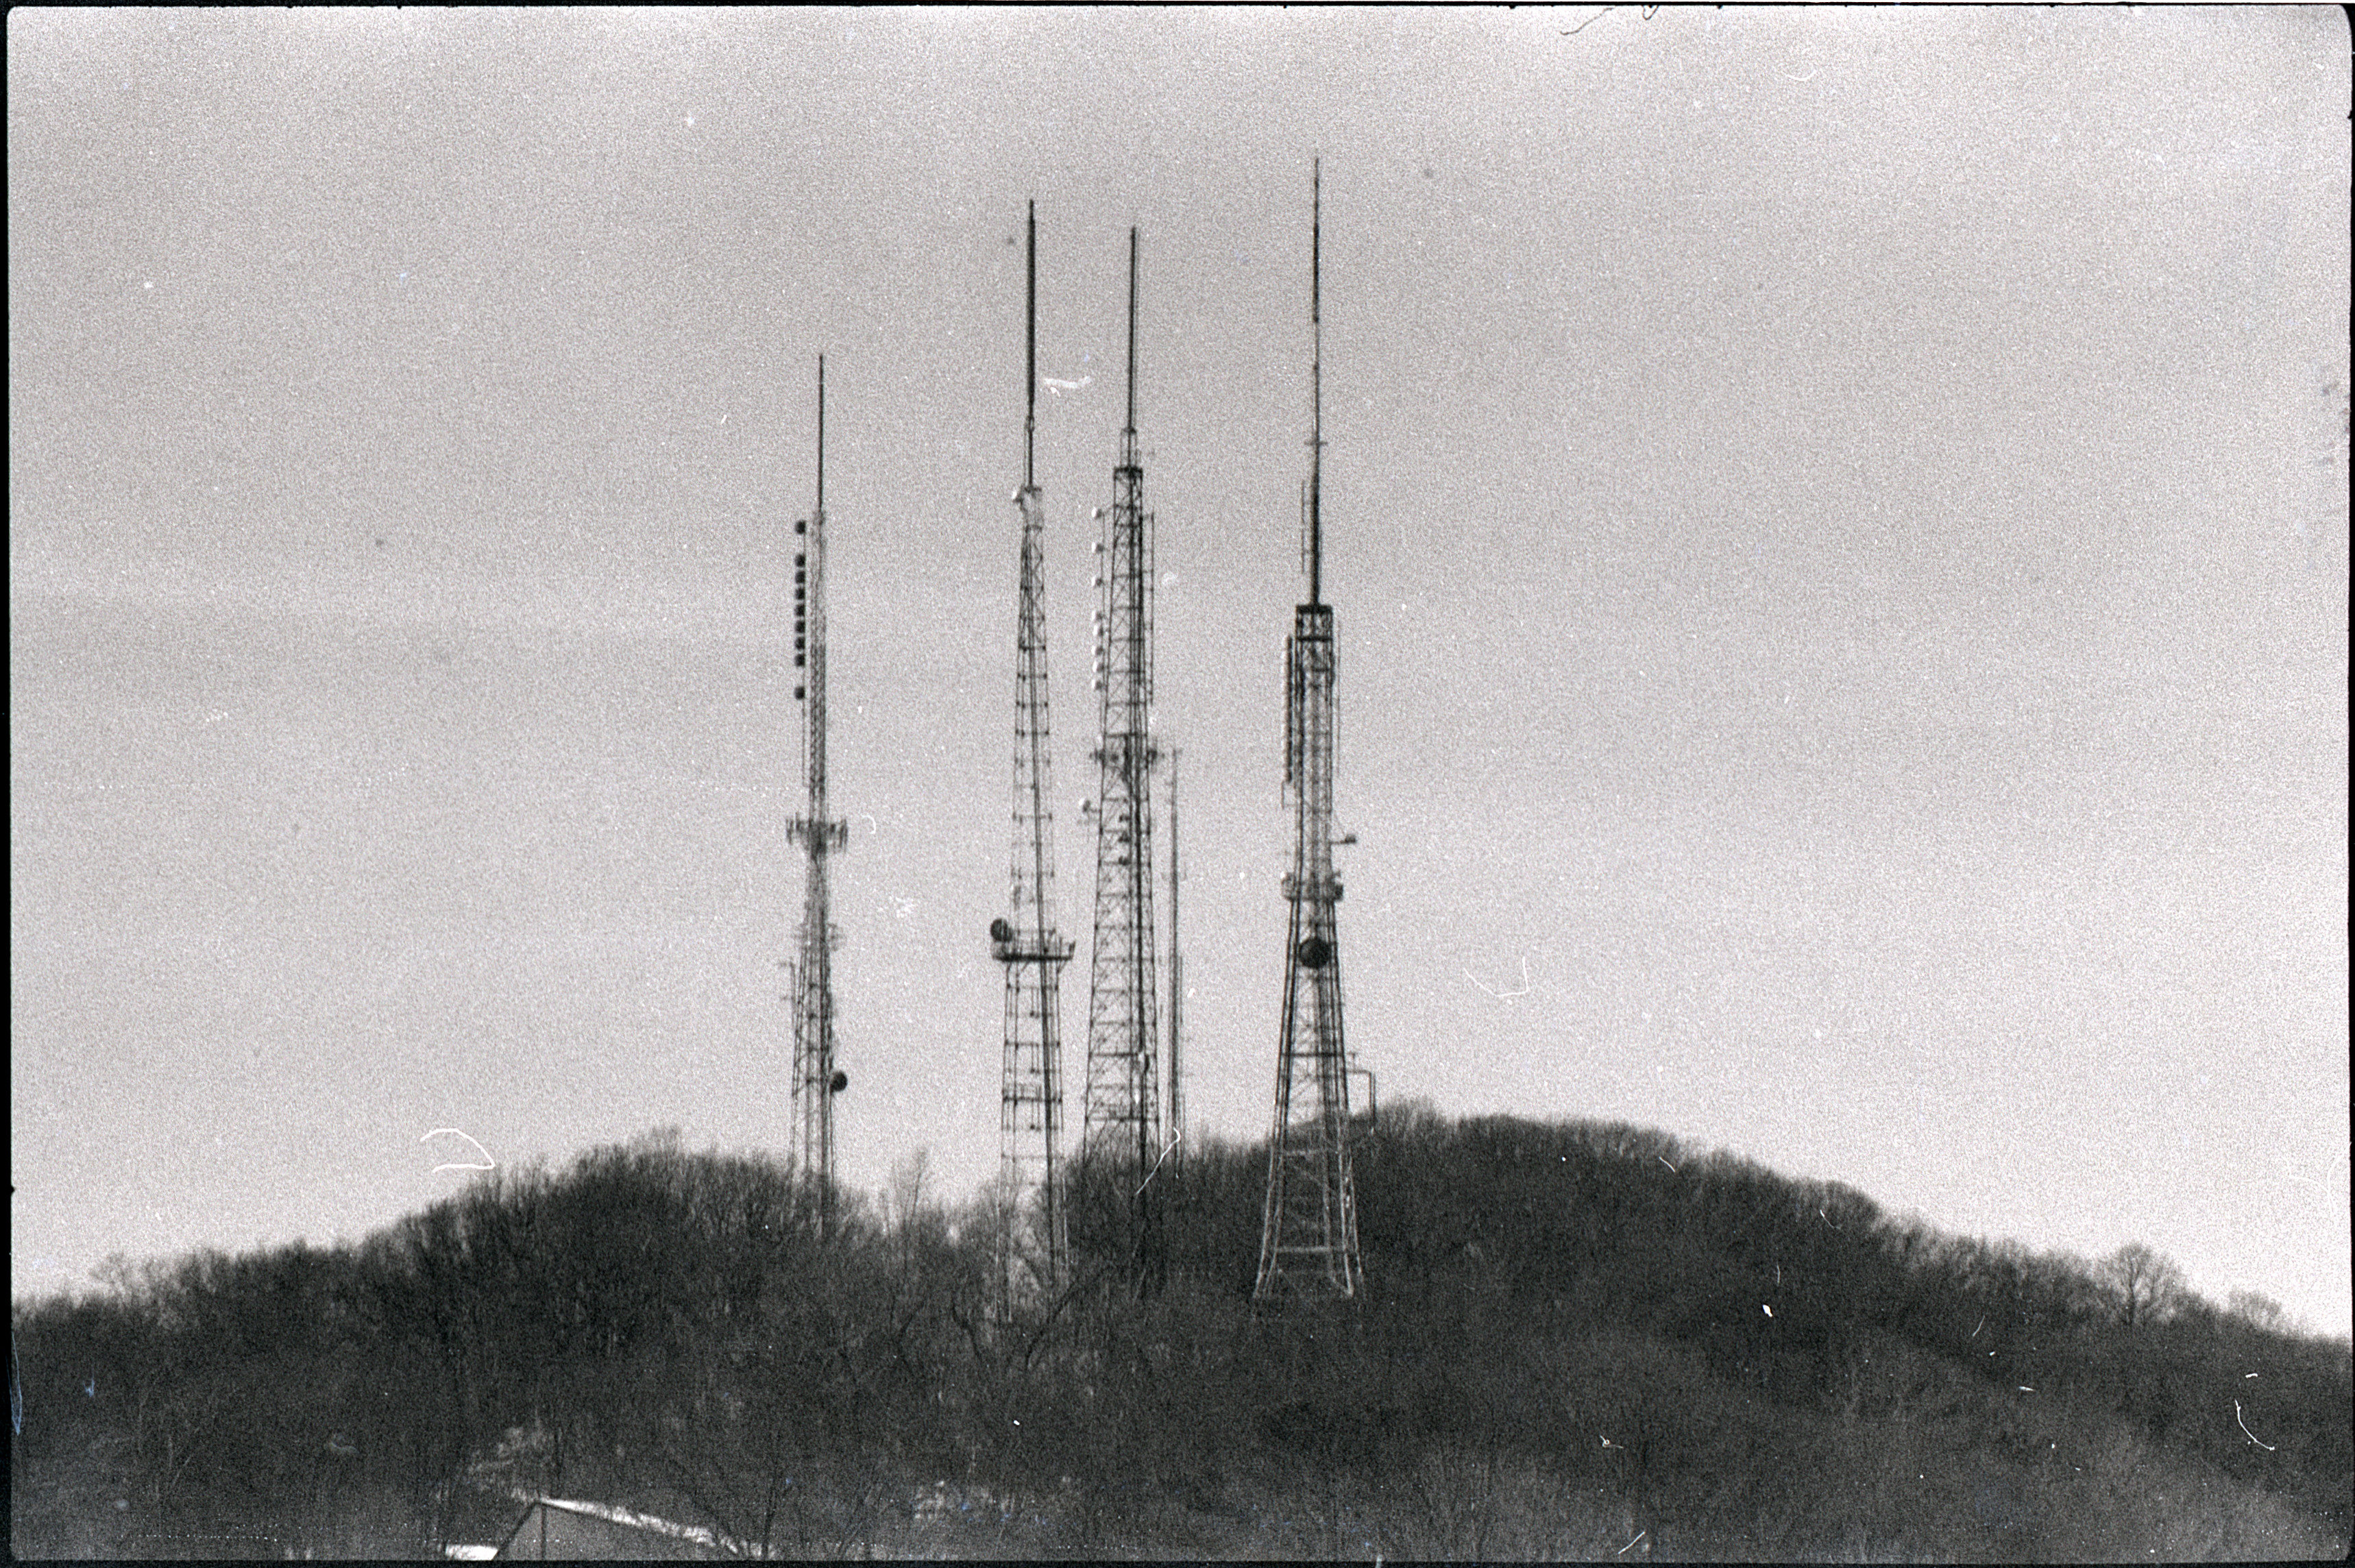 photo, black and white with some film artifacting: four radio towers covered in antennae rising above trees on a hilltop to pierce the sky